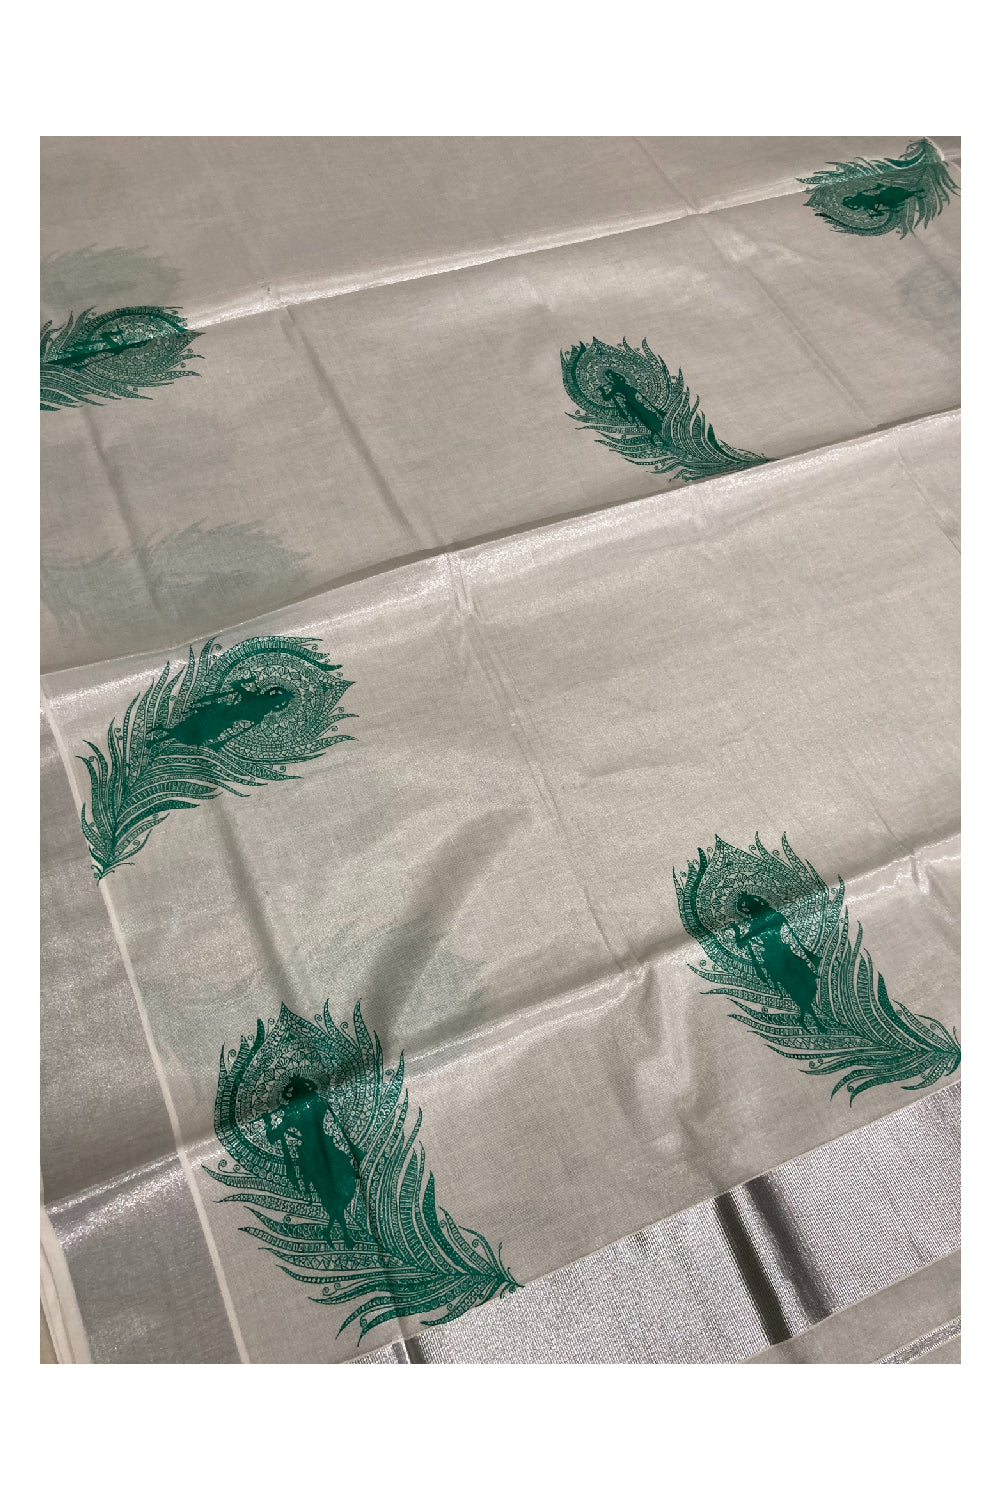 Silver Tissue Saree with Green Krishna and Feather Mural Design